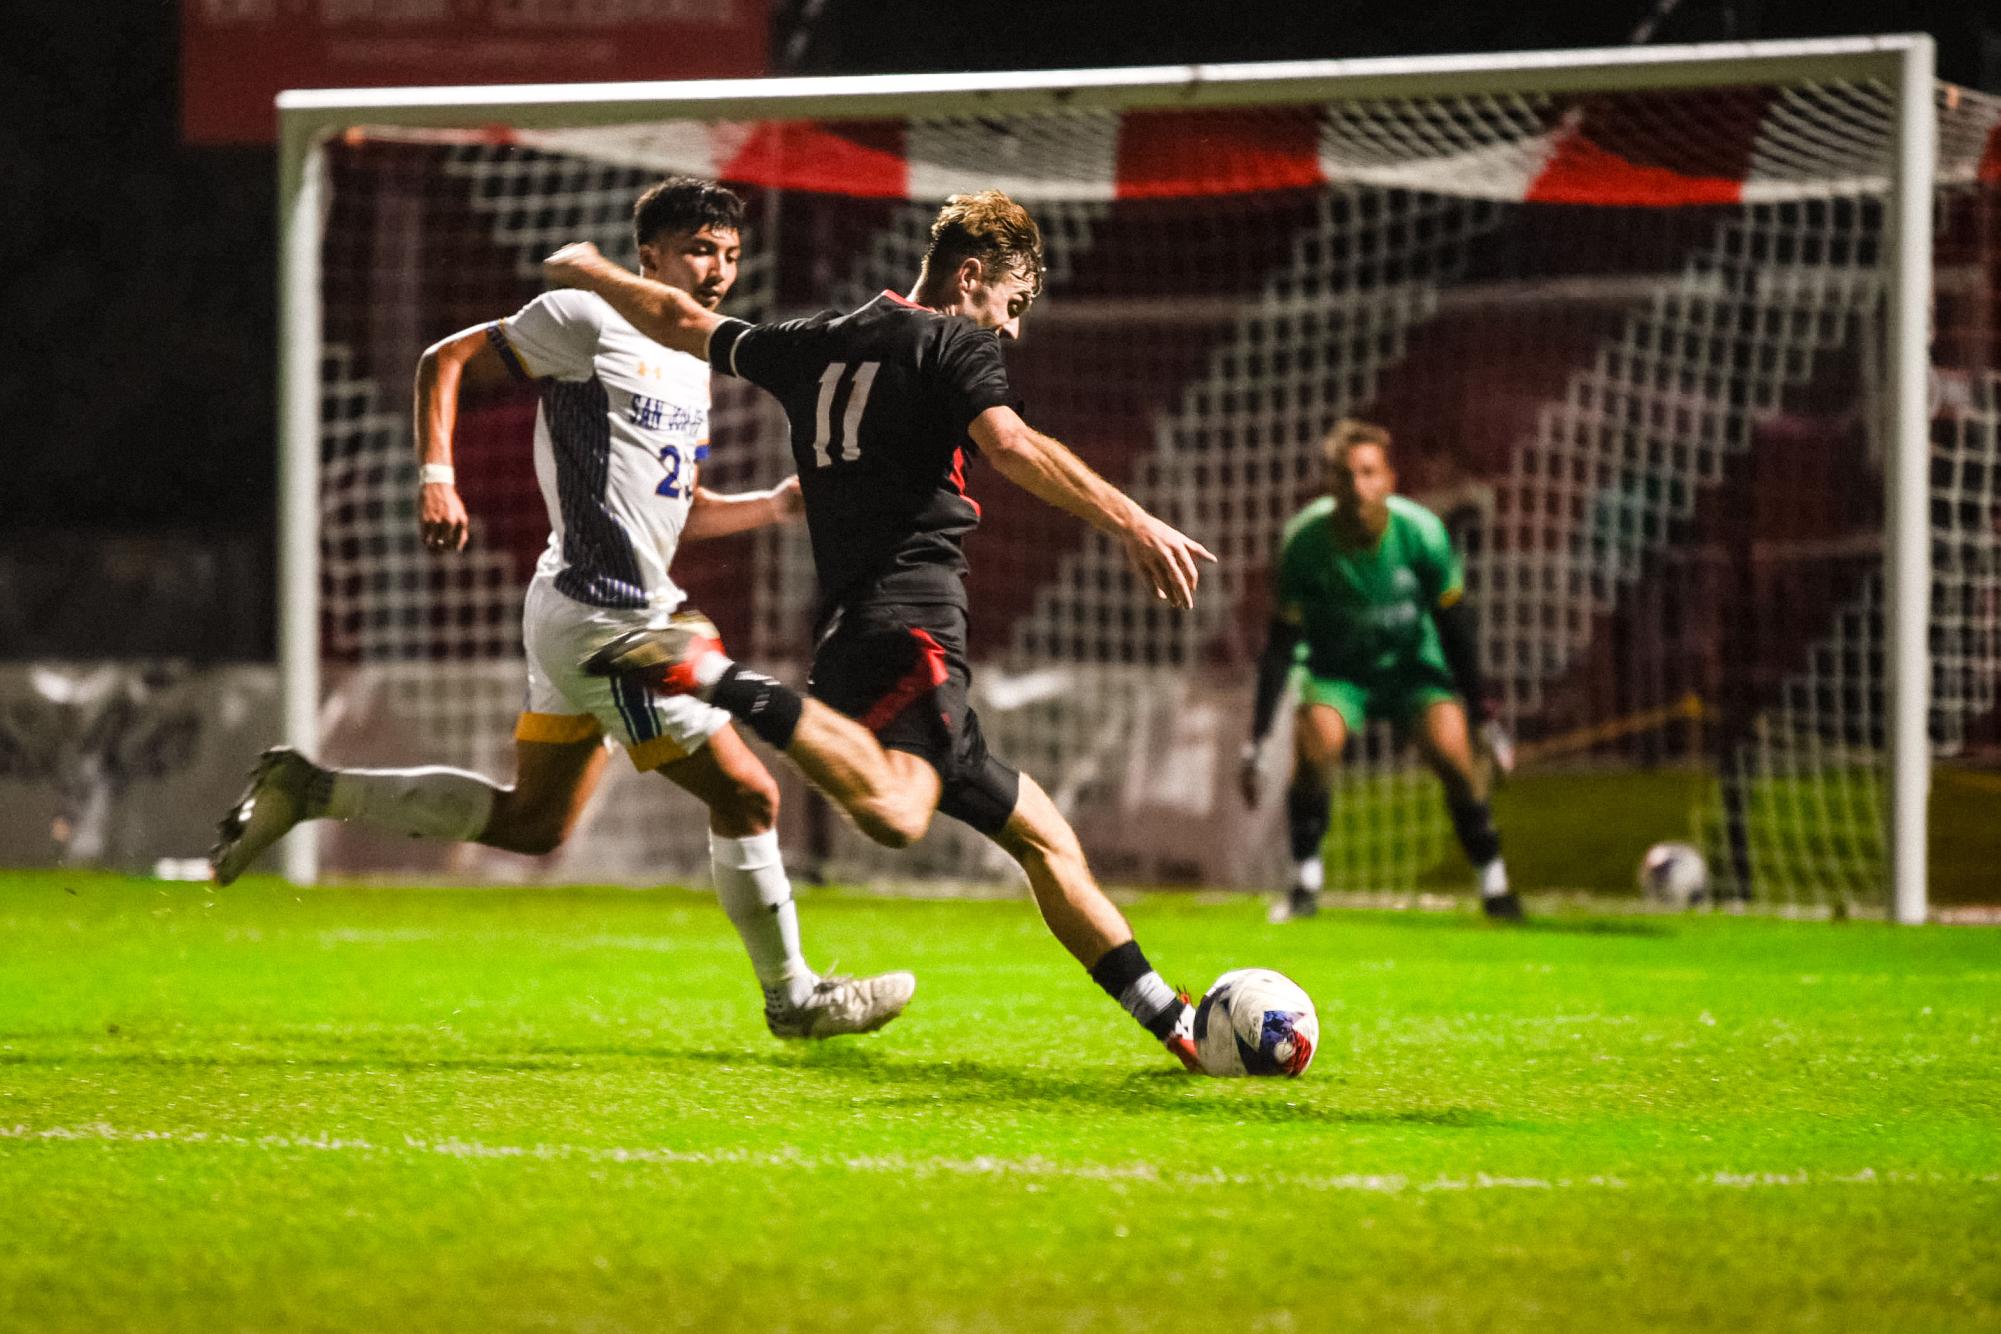 Redhawks Men’s Soccer Looks to the Future After First Round Exit